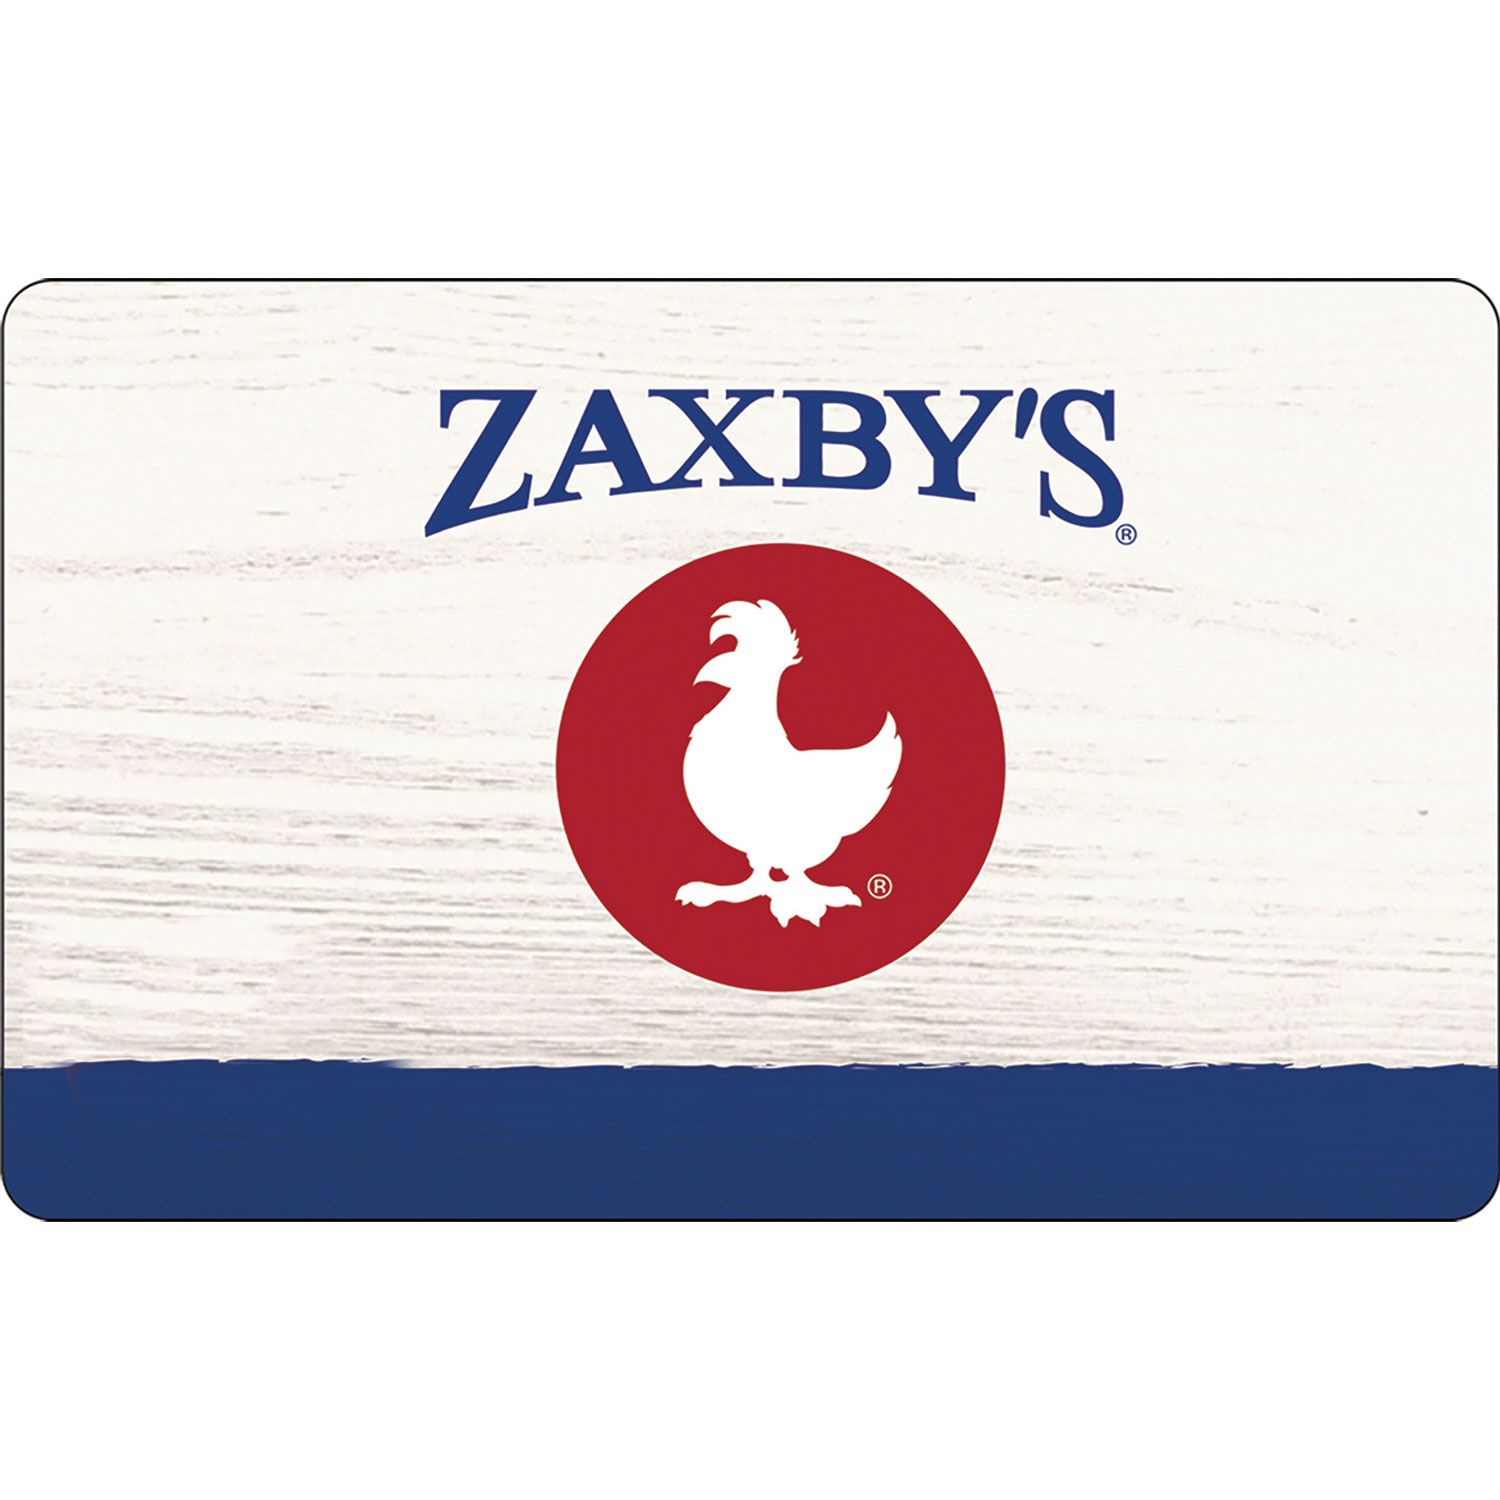 $35.98 for this $50 Zaxbys Gif...